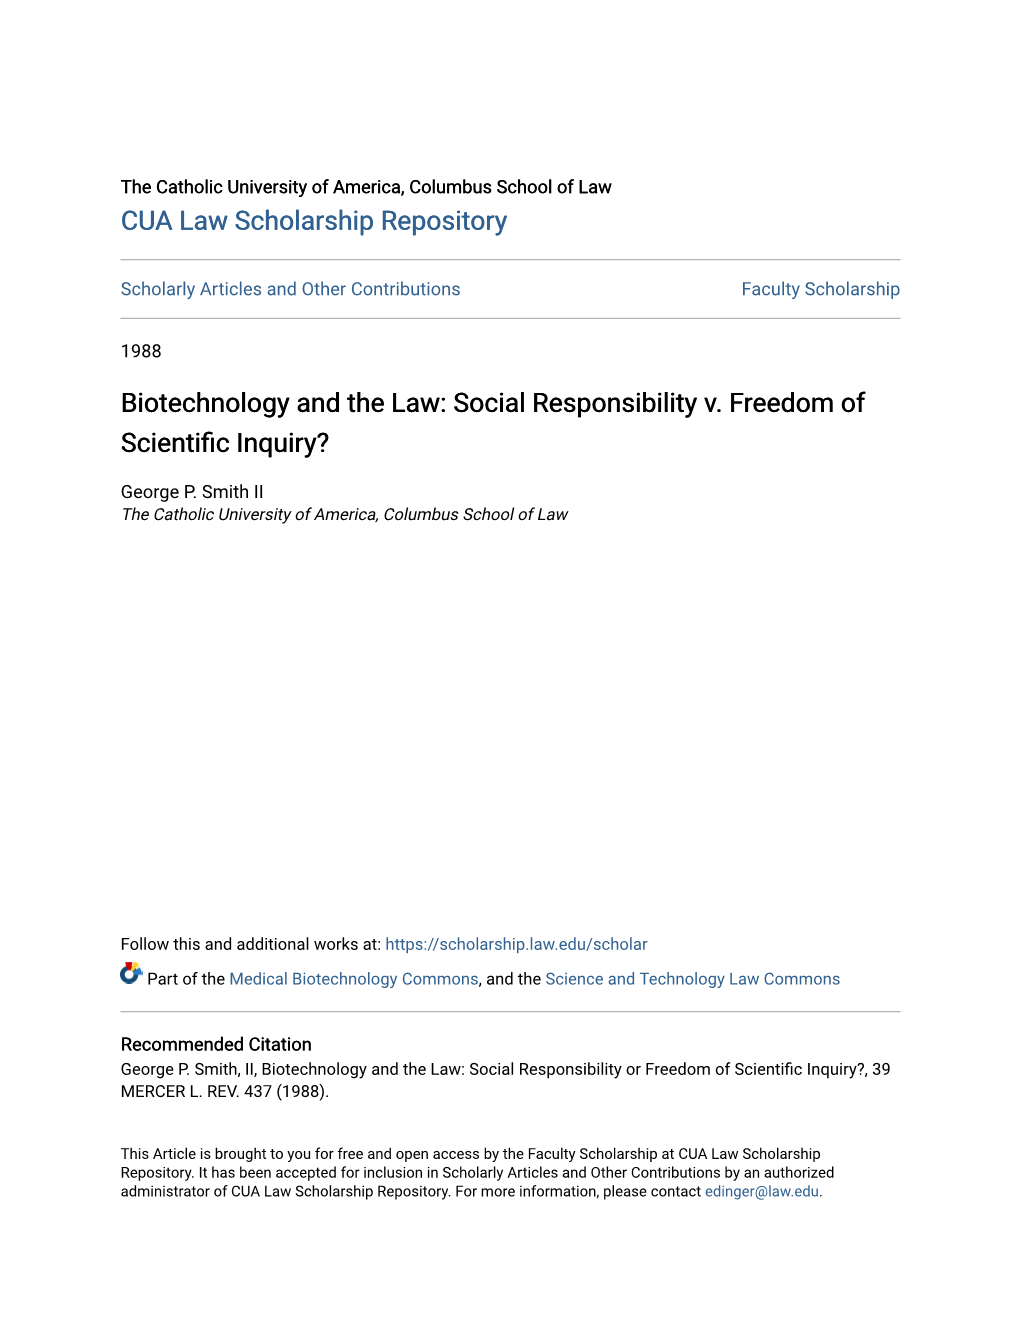 Biotechnology and the Law: Social Responsibility V. Freedom of Scientific Inquiry?